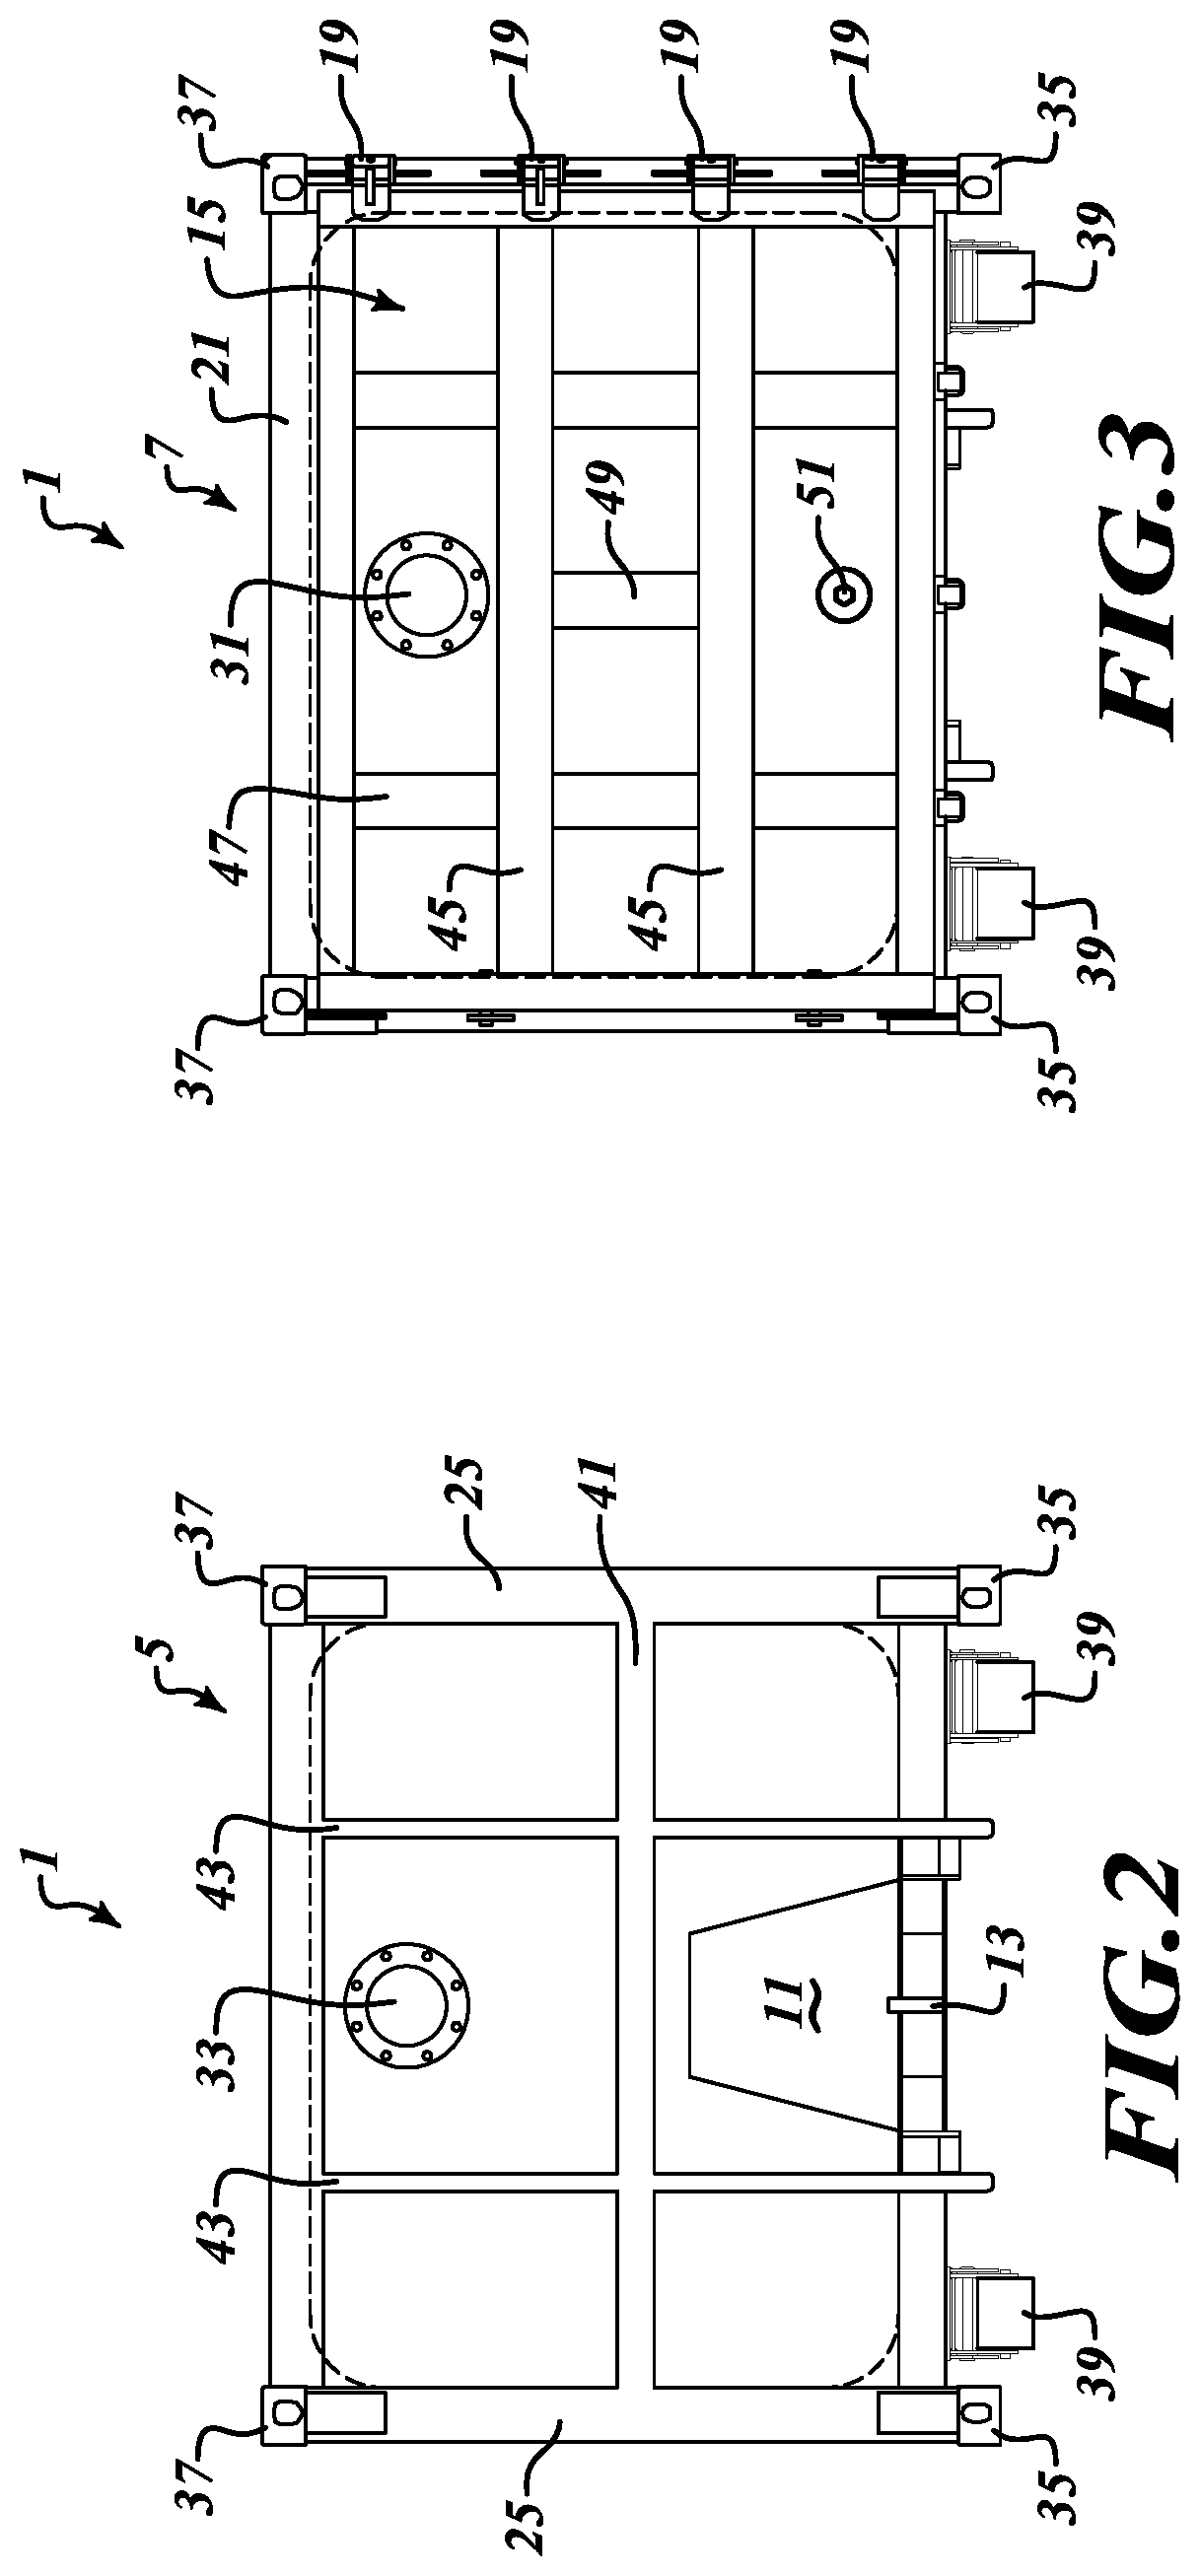 Sludge containment vessel and method for use in concert with a vacuum truck in spill containment